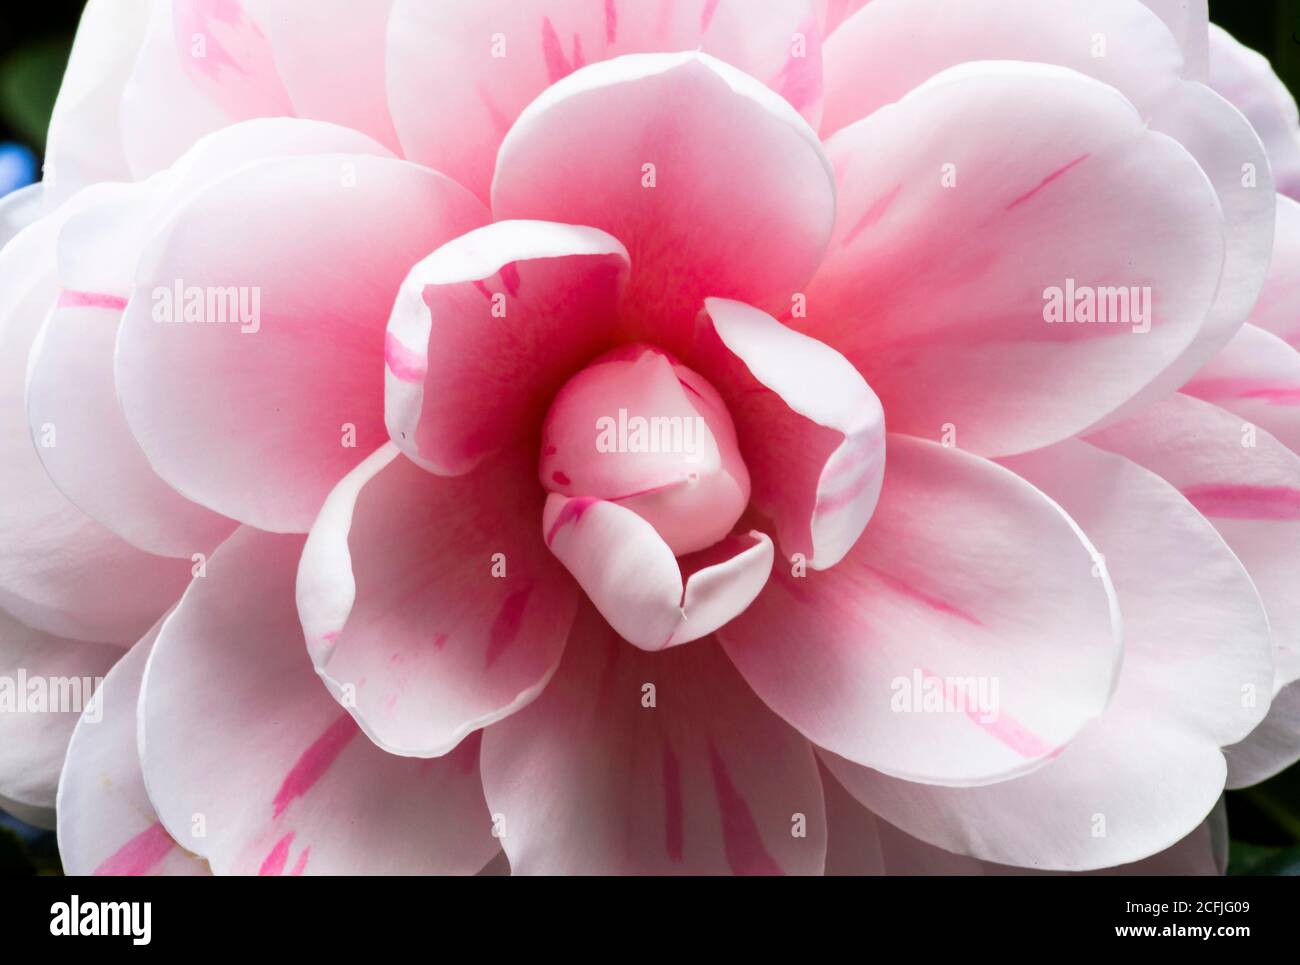 Pink with white Camellia flowers, beautiful pink with white flowers blooming in the garden in winter, Stock Photo